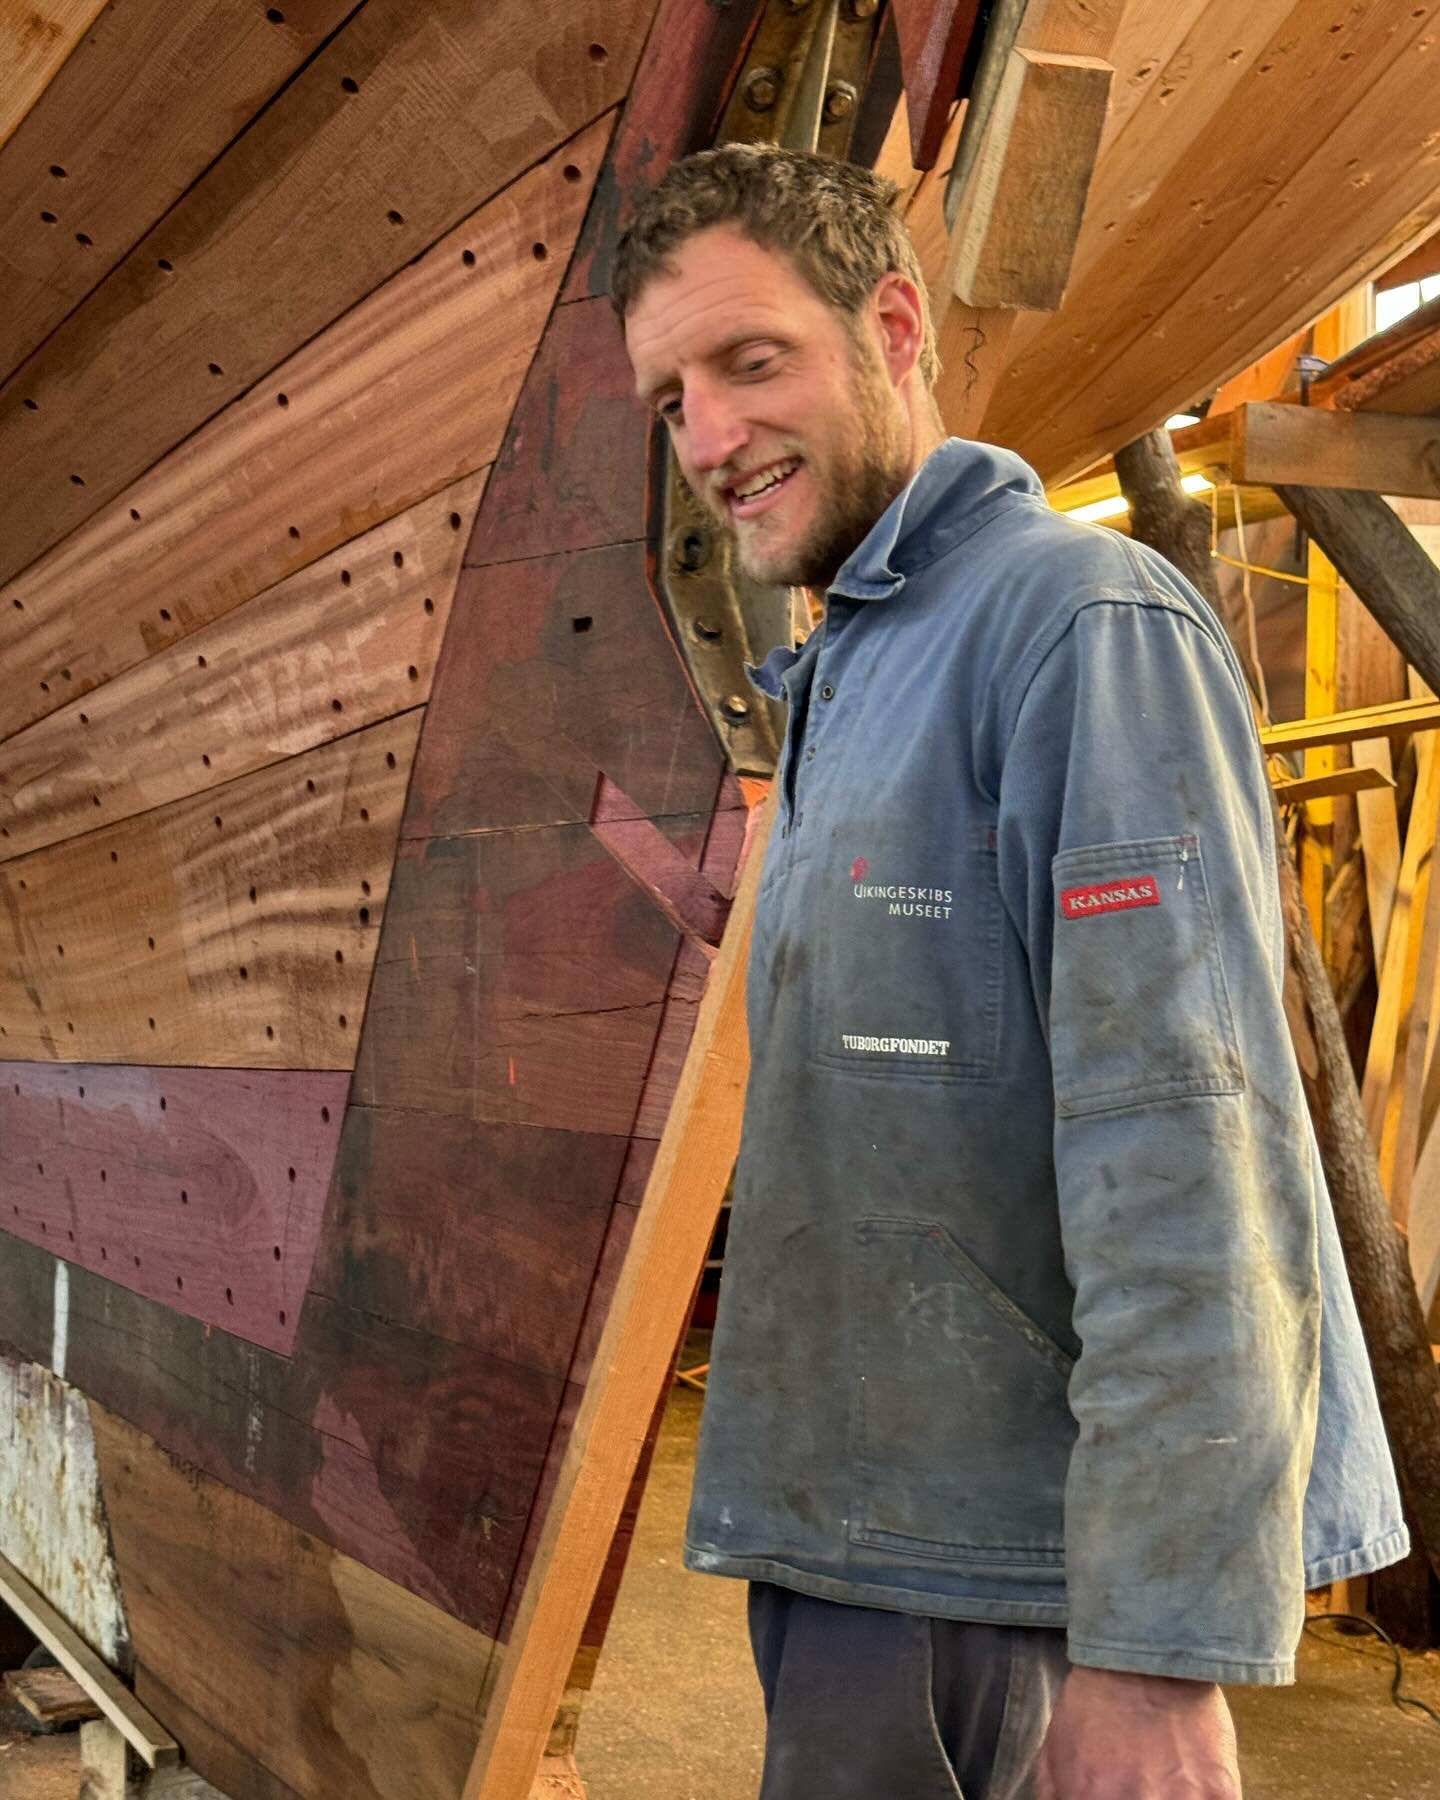 Watching this beautiful vessel take shape over the past several months has been phenomenal.  It demonstrates what is possible with  passion and dedication (Josh &amp; Erin) and the hard work and craftsmanship of the work crew.  Bravo!